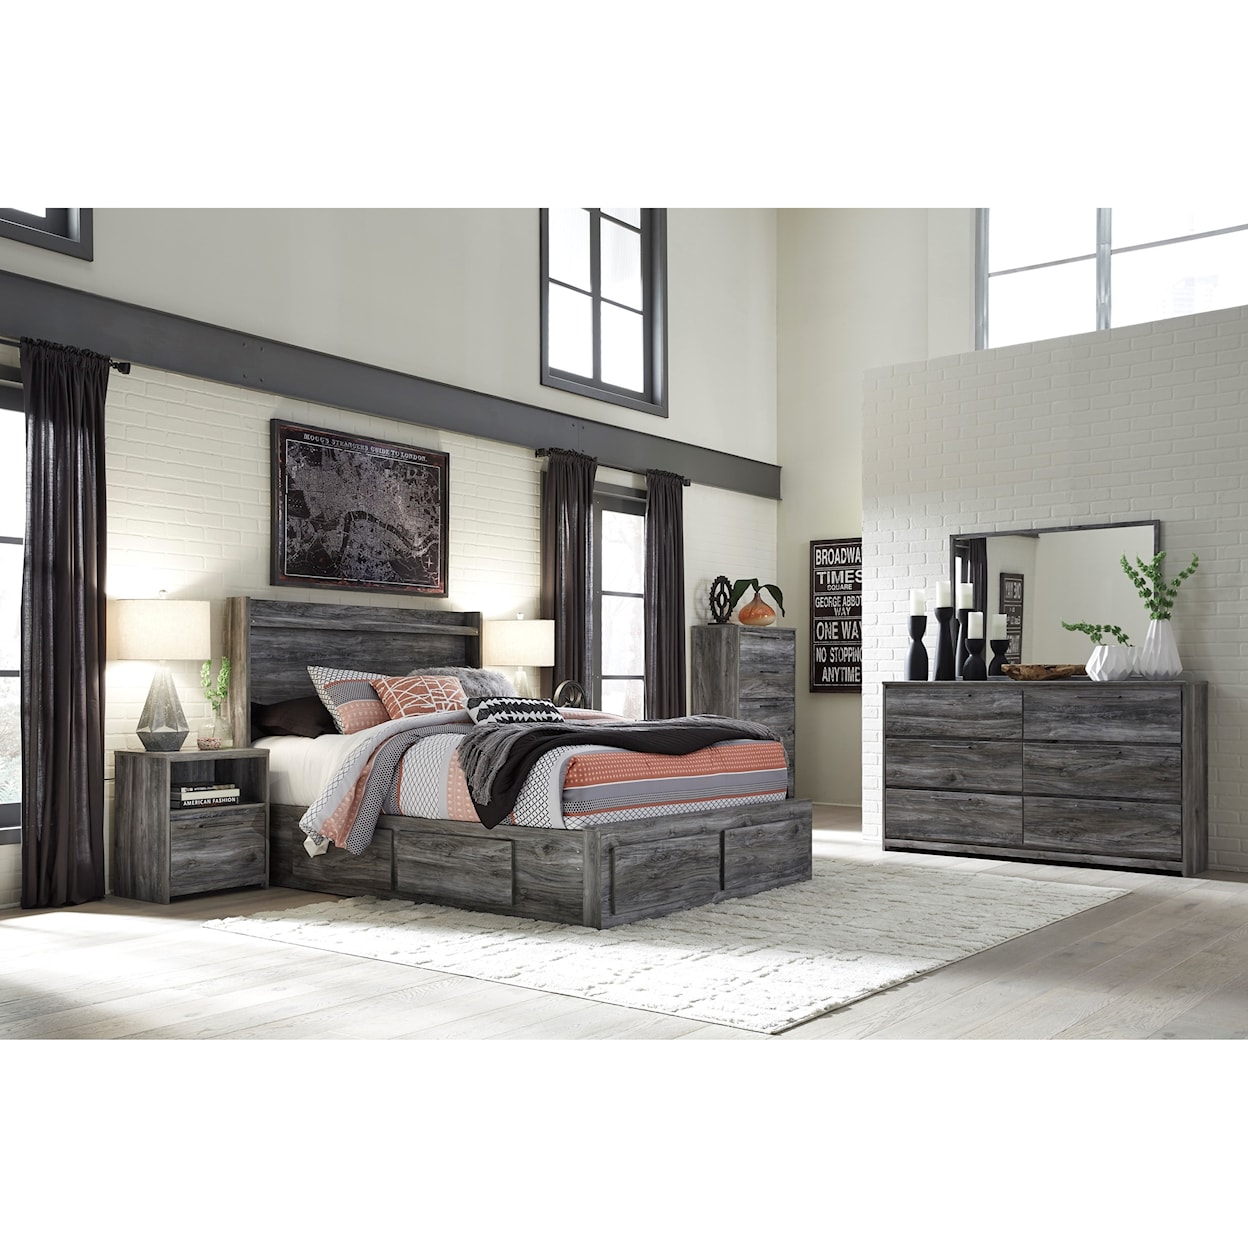 Ashley Furniture Signature Design Baystorm Queen Storage Bed with 6 Drawers